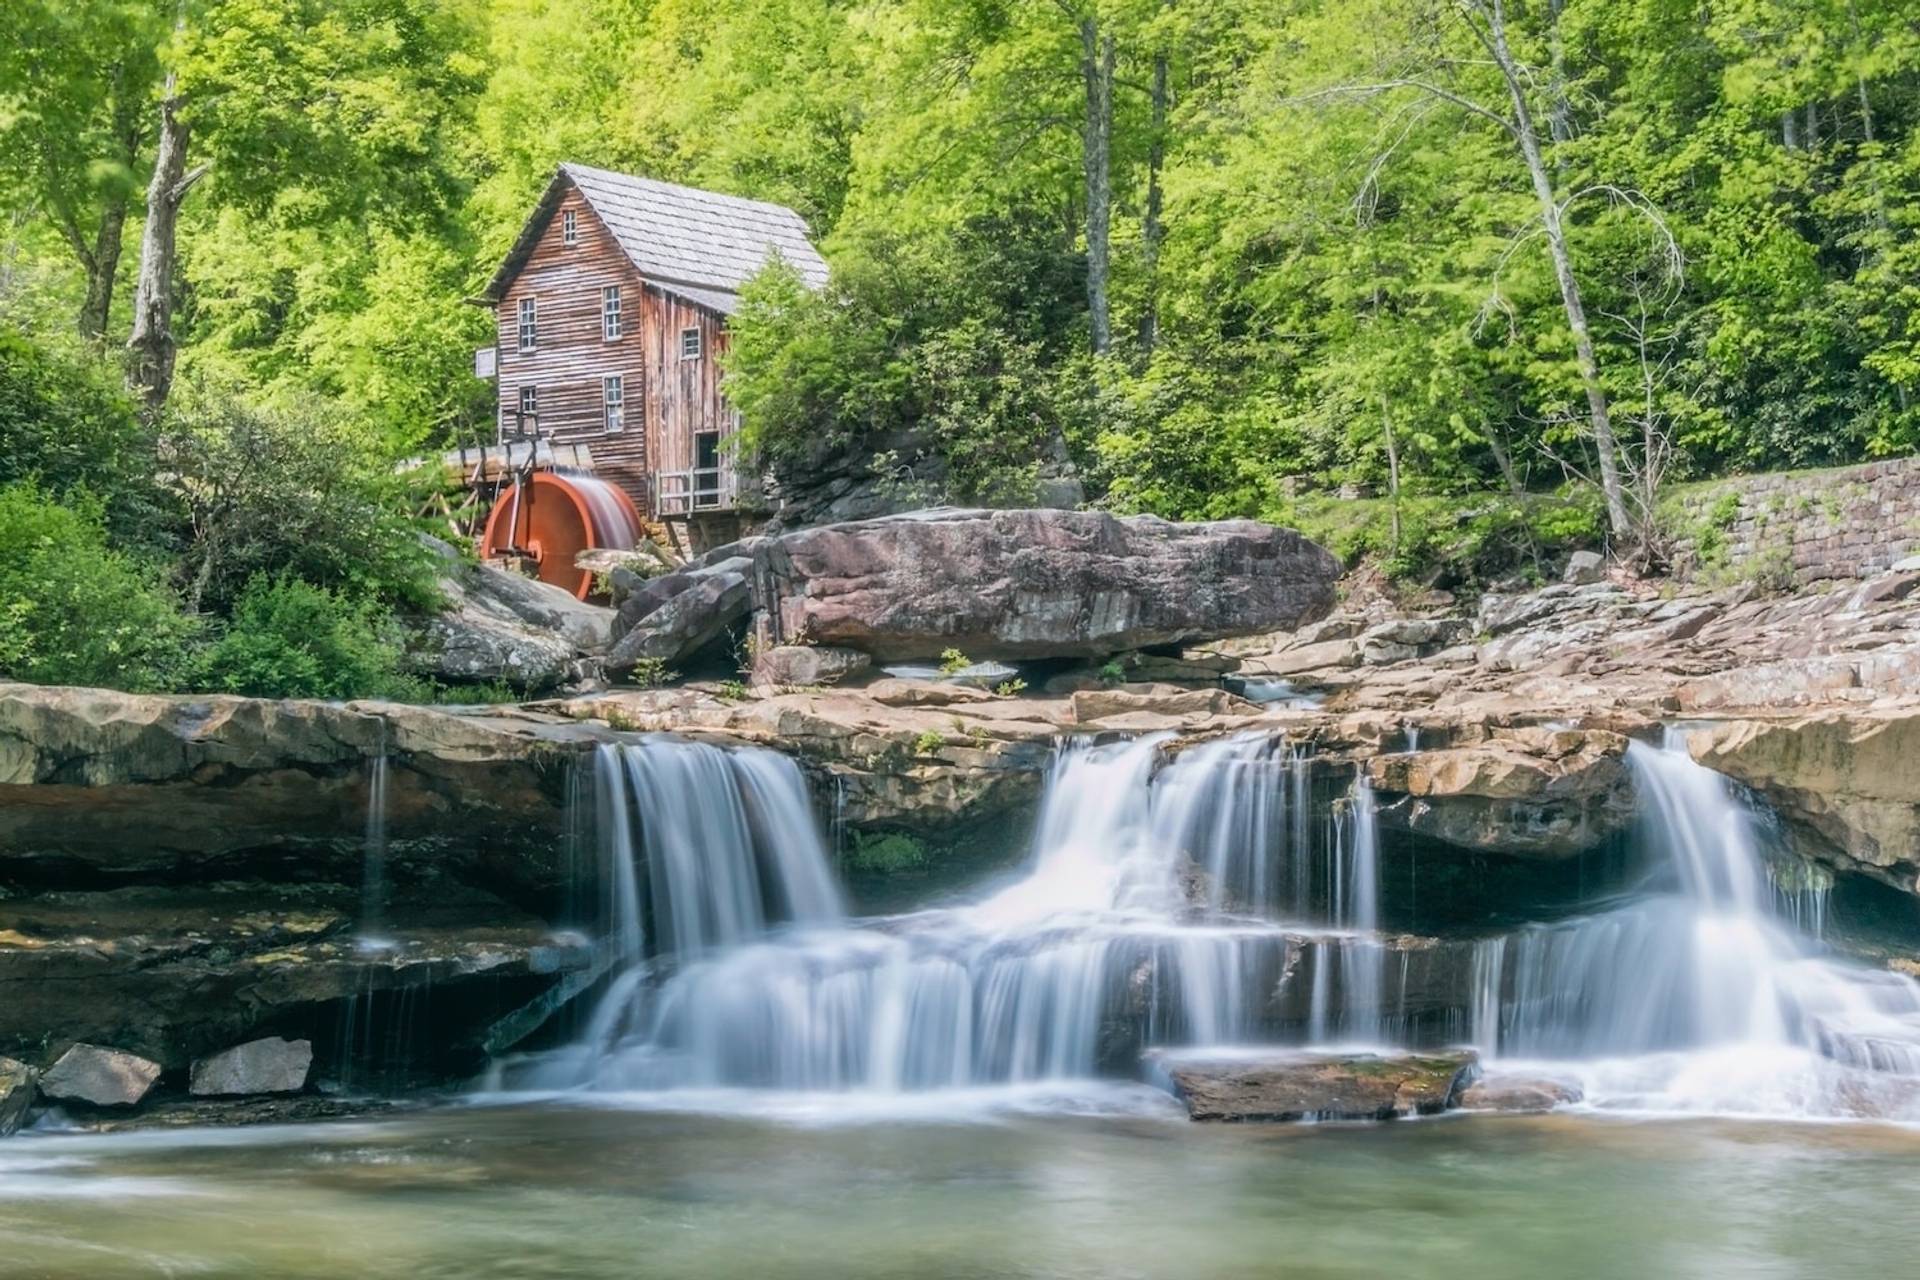 Rustic wooden building near waterfall amid lush green trees to represent where to buy e-bikes in West Virginia